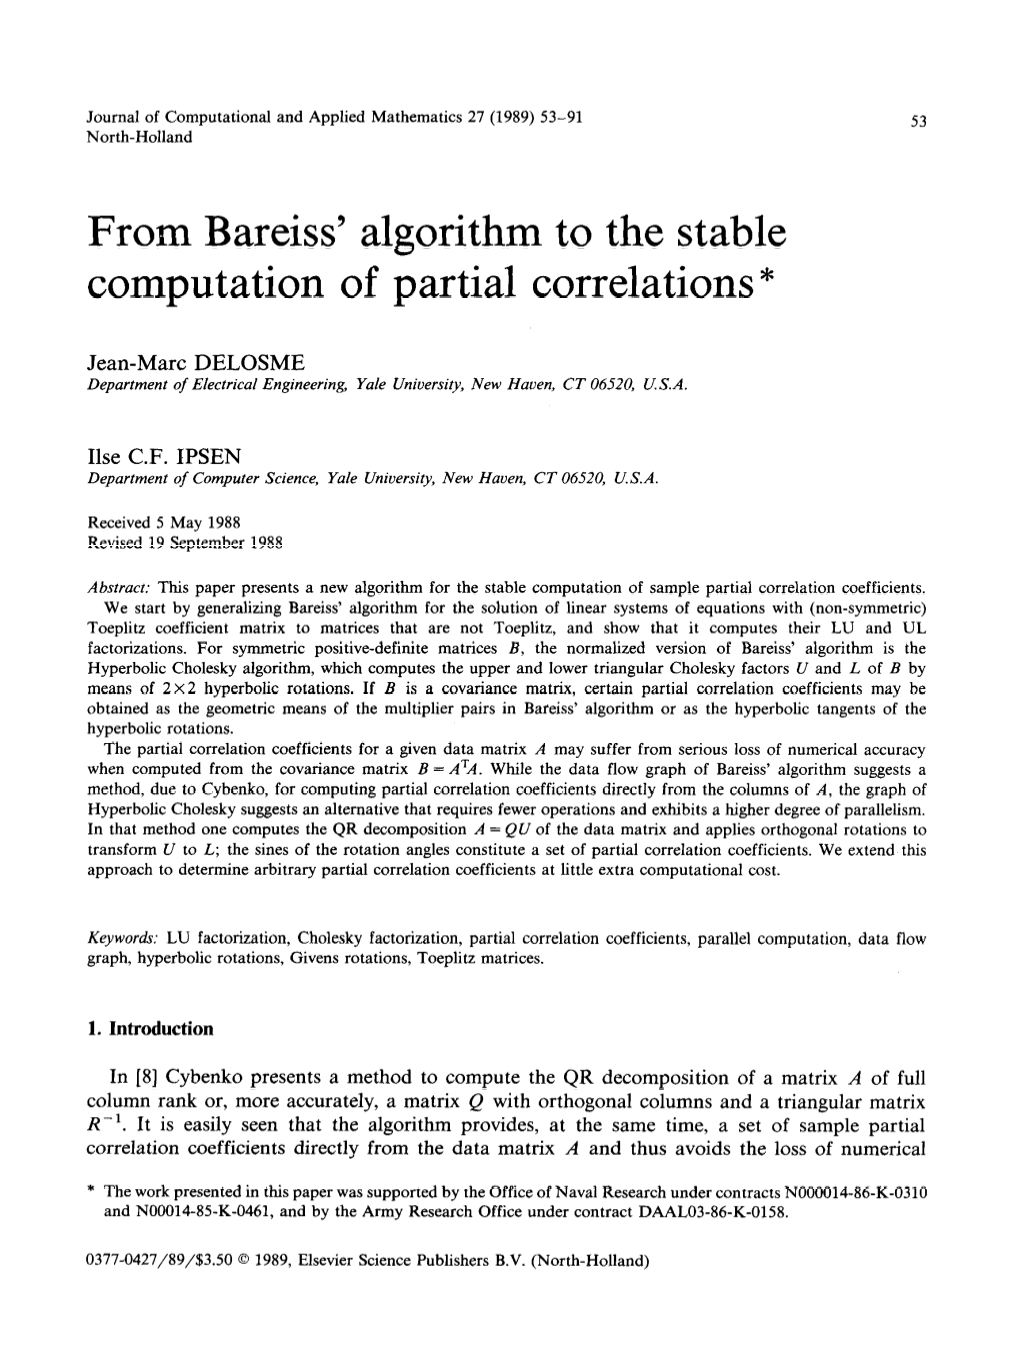 From Bareiss' Algorithm to the Stable Computation of Partial Correlations *